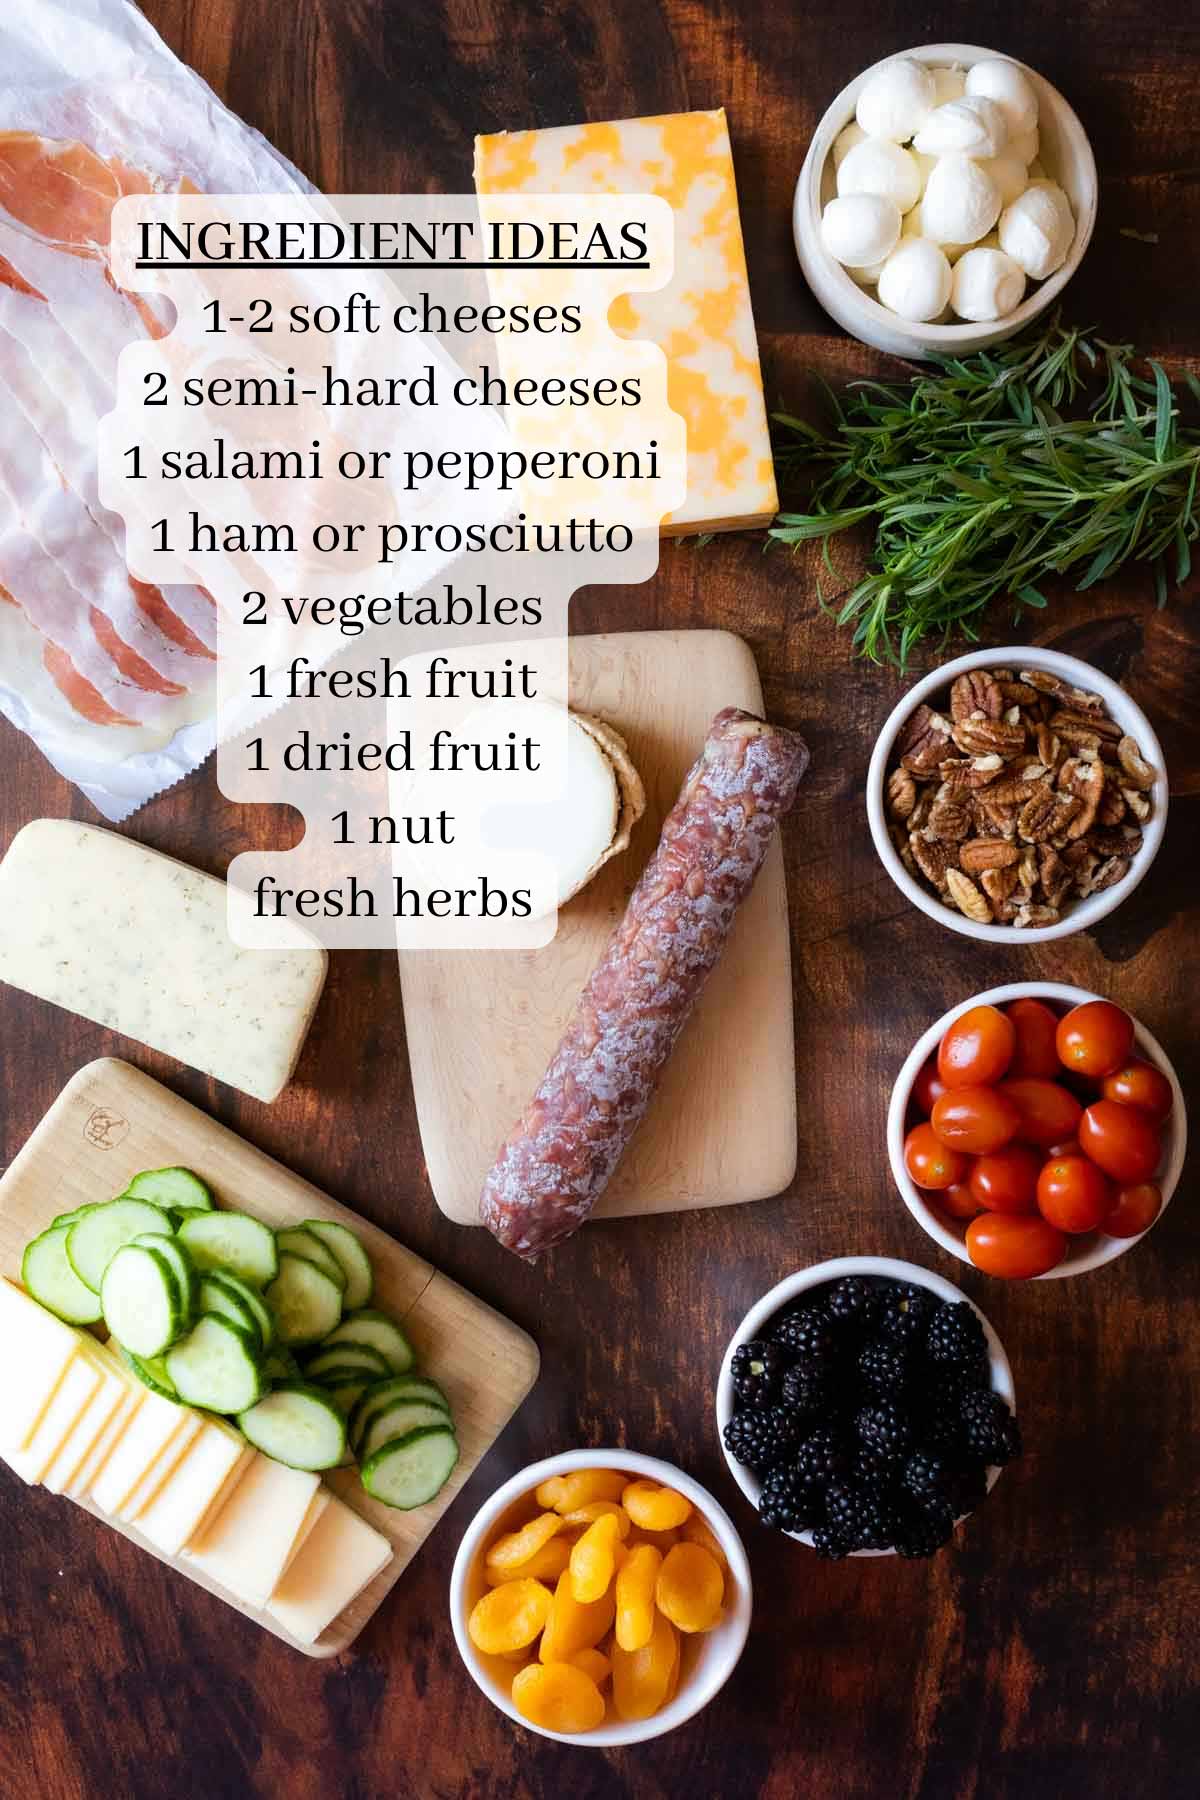 Ingredients for a grazing board on a cutting board.